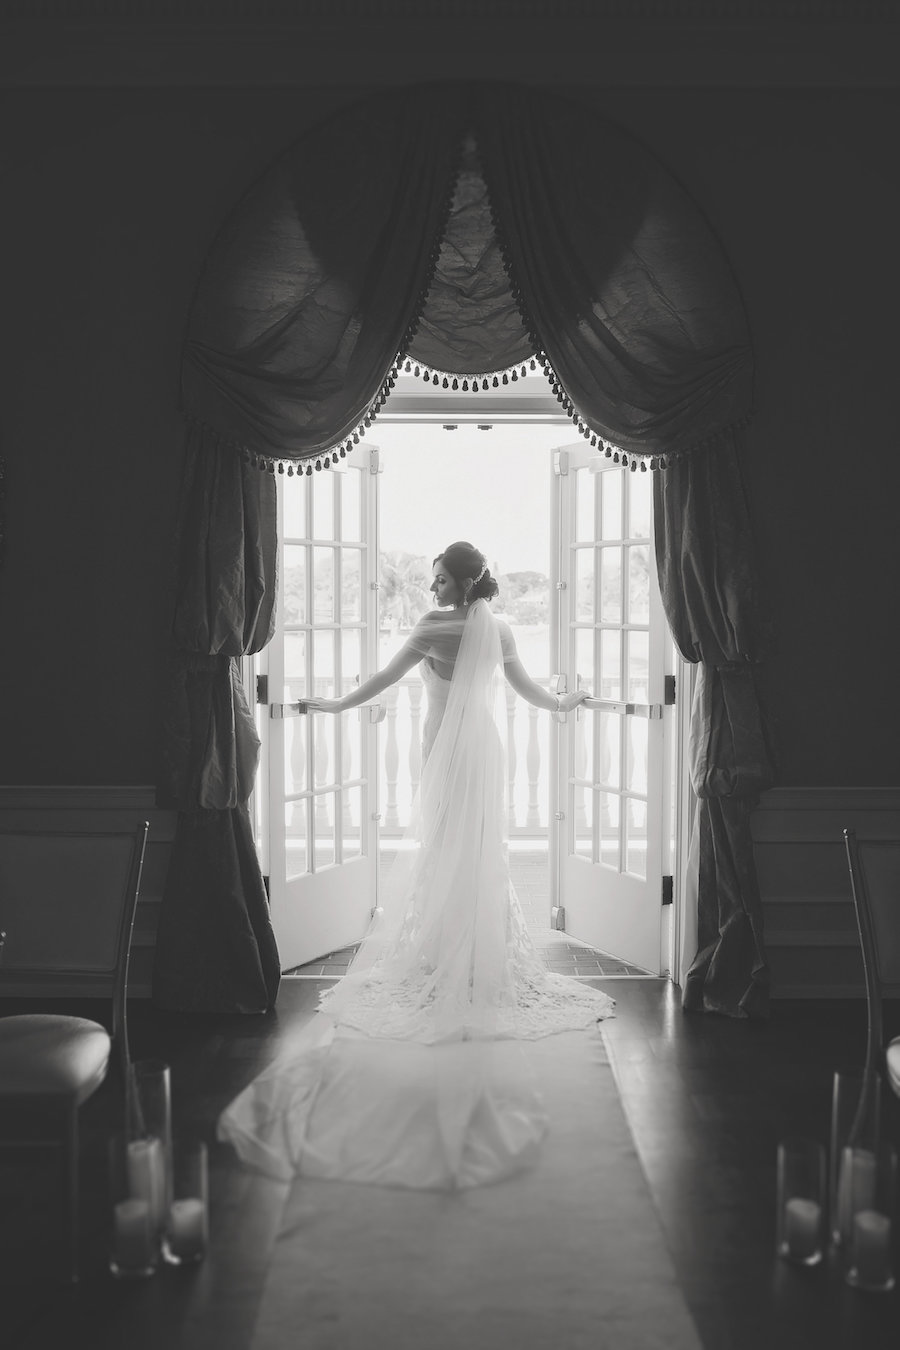 Bridal Portrait in Wedding Gown with Veil